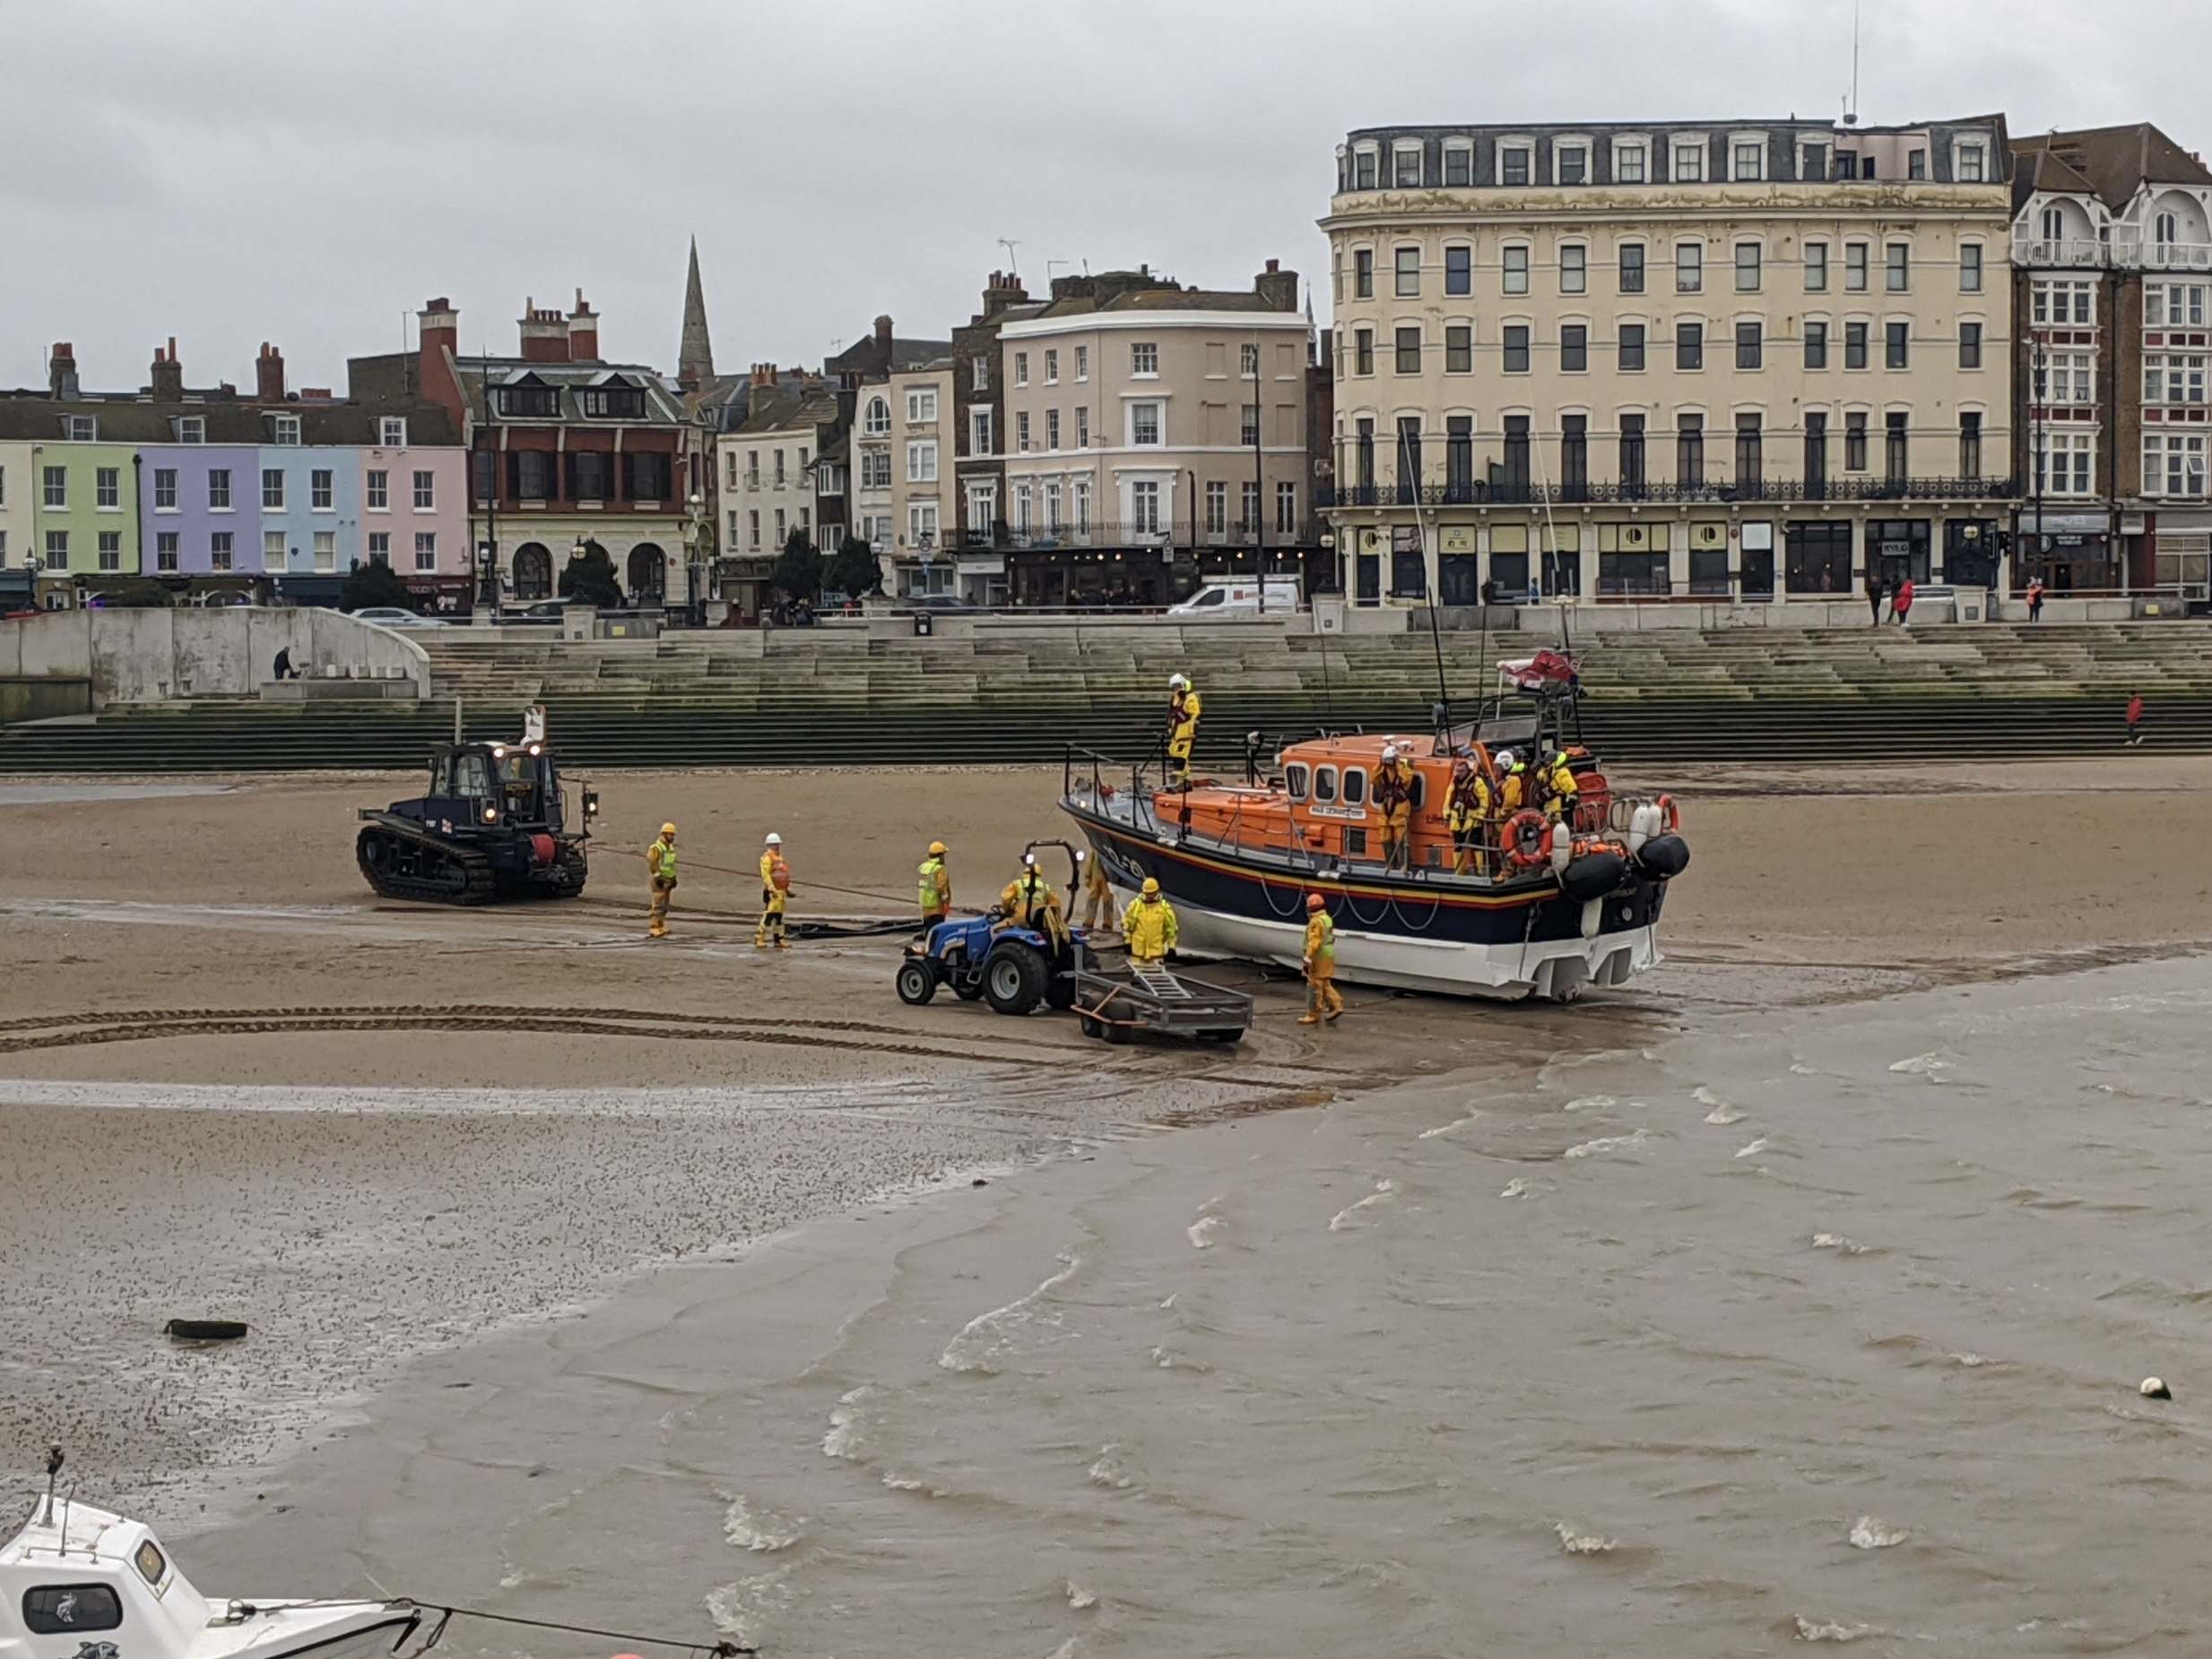 A man was reported missing off Margate Harbour